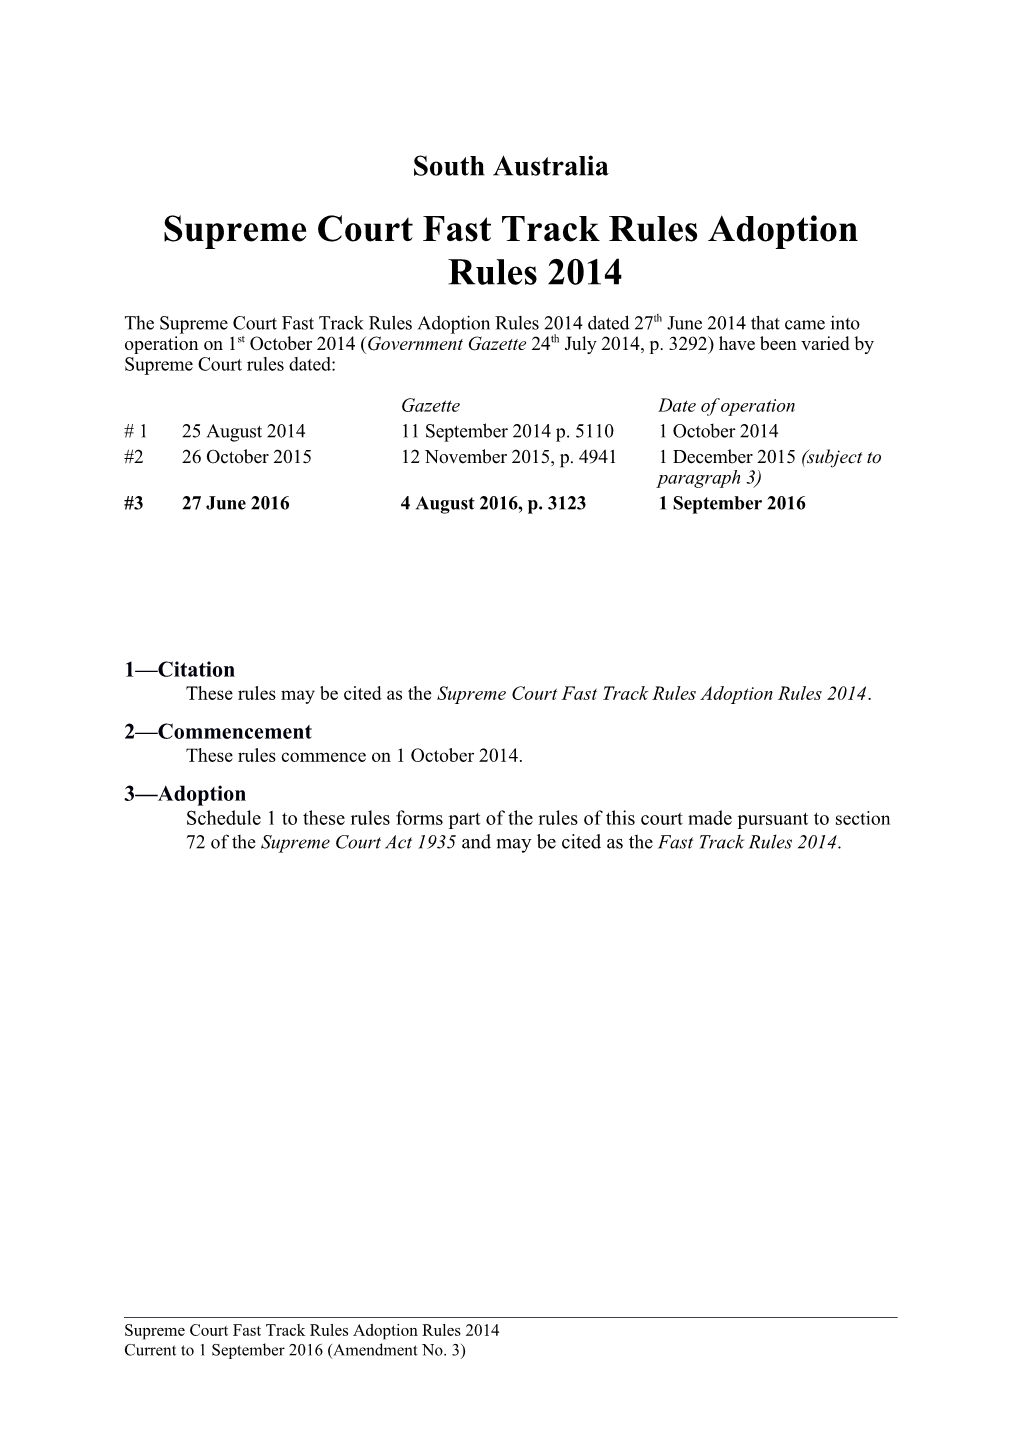 Supreme Court Fast Track Rules Adoption Rules 2014